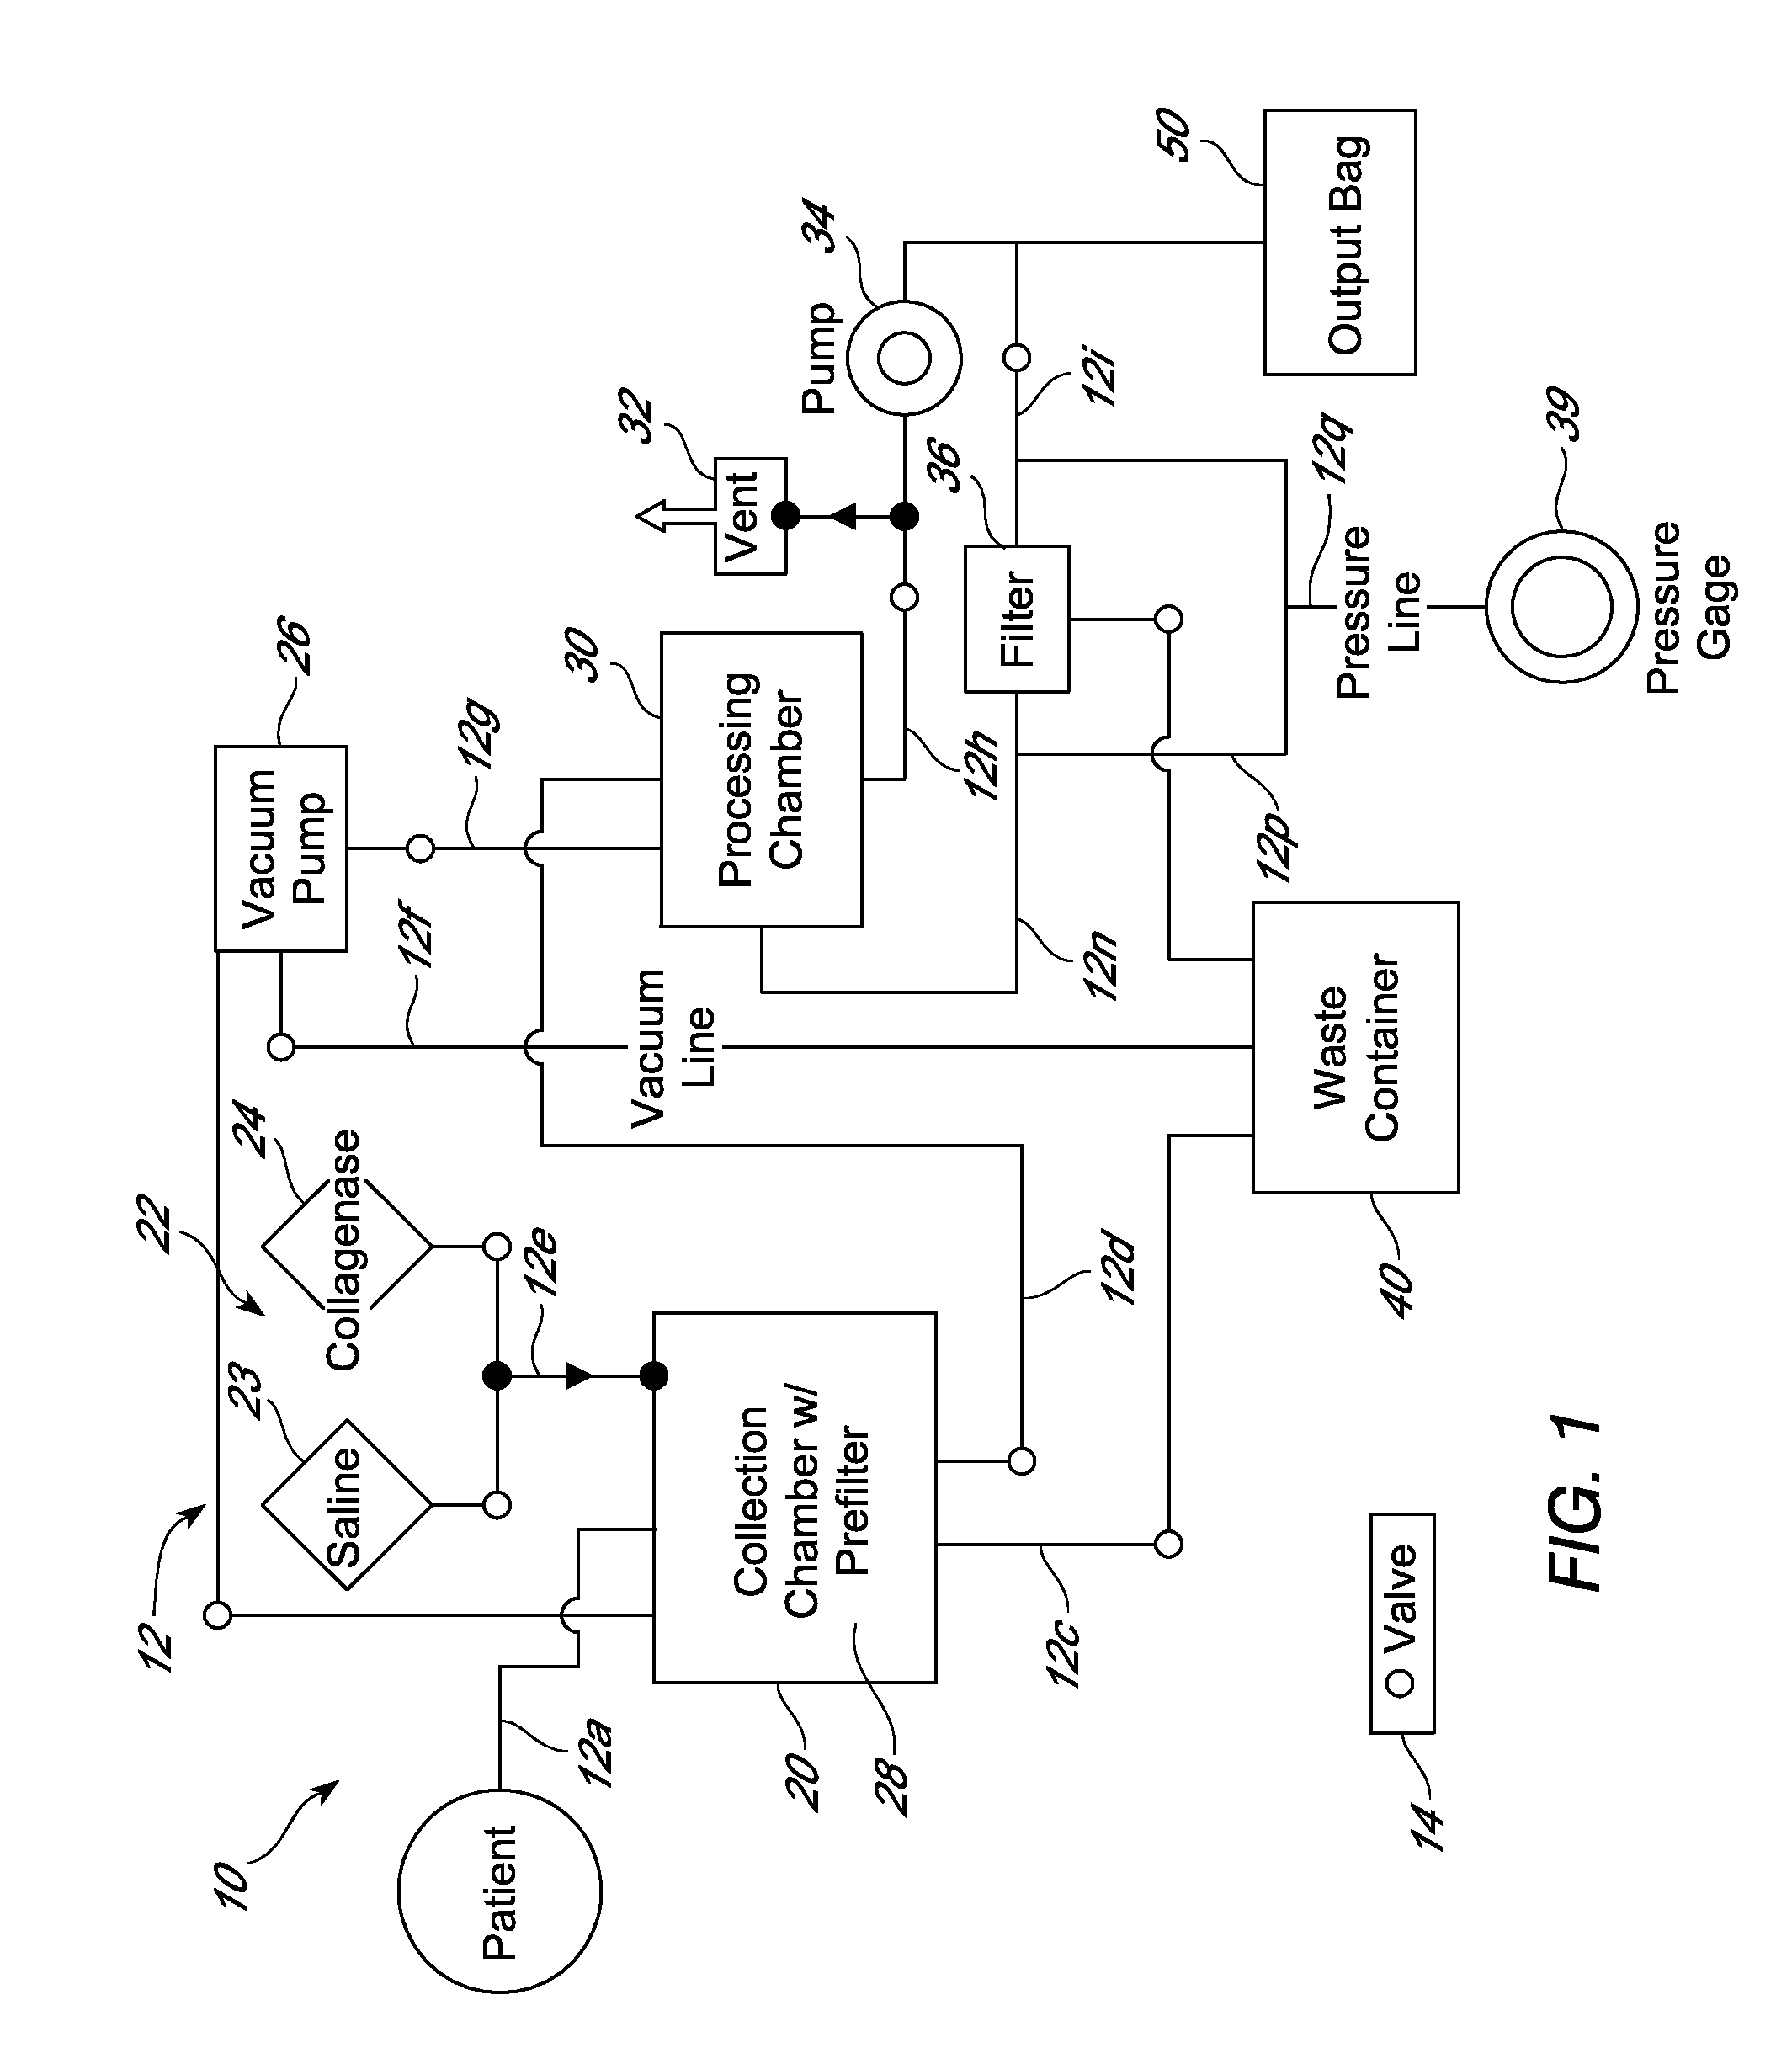 Methods of using adipose tissue-derived cells in the treatment of the lymphatic system and malignant disease